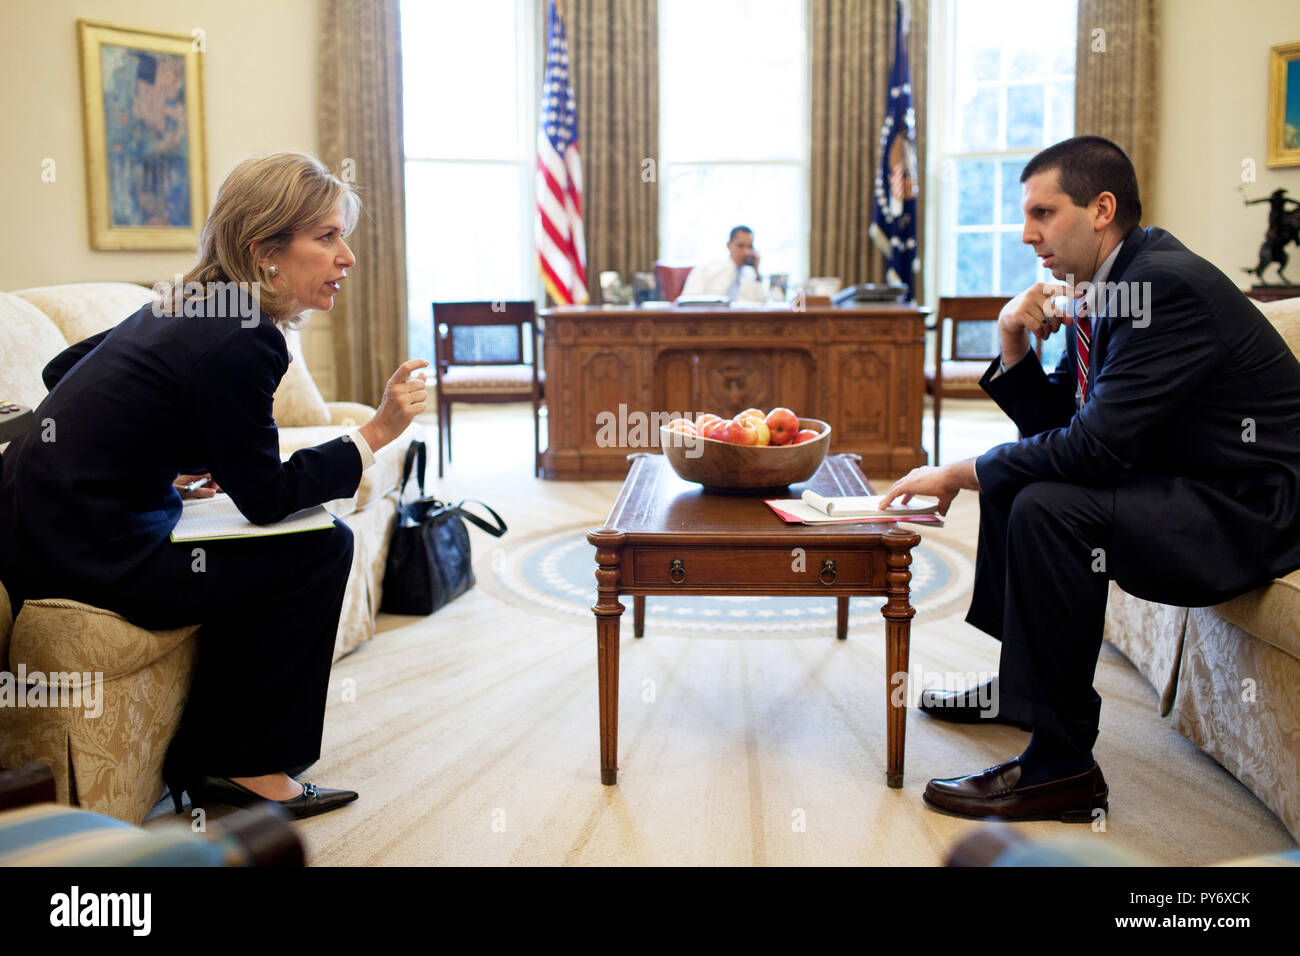 Dr. Elizabeth 'Liz' Sherwood-Randall, NSC Senior Director for European Affairs and NSC Chief of Staff Mark Lippert confer in the Oval Office while President Barack Obama talks on the phone with a foreign leader 2/16/09. Official White House Photo by Pete Souza Stock Photo